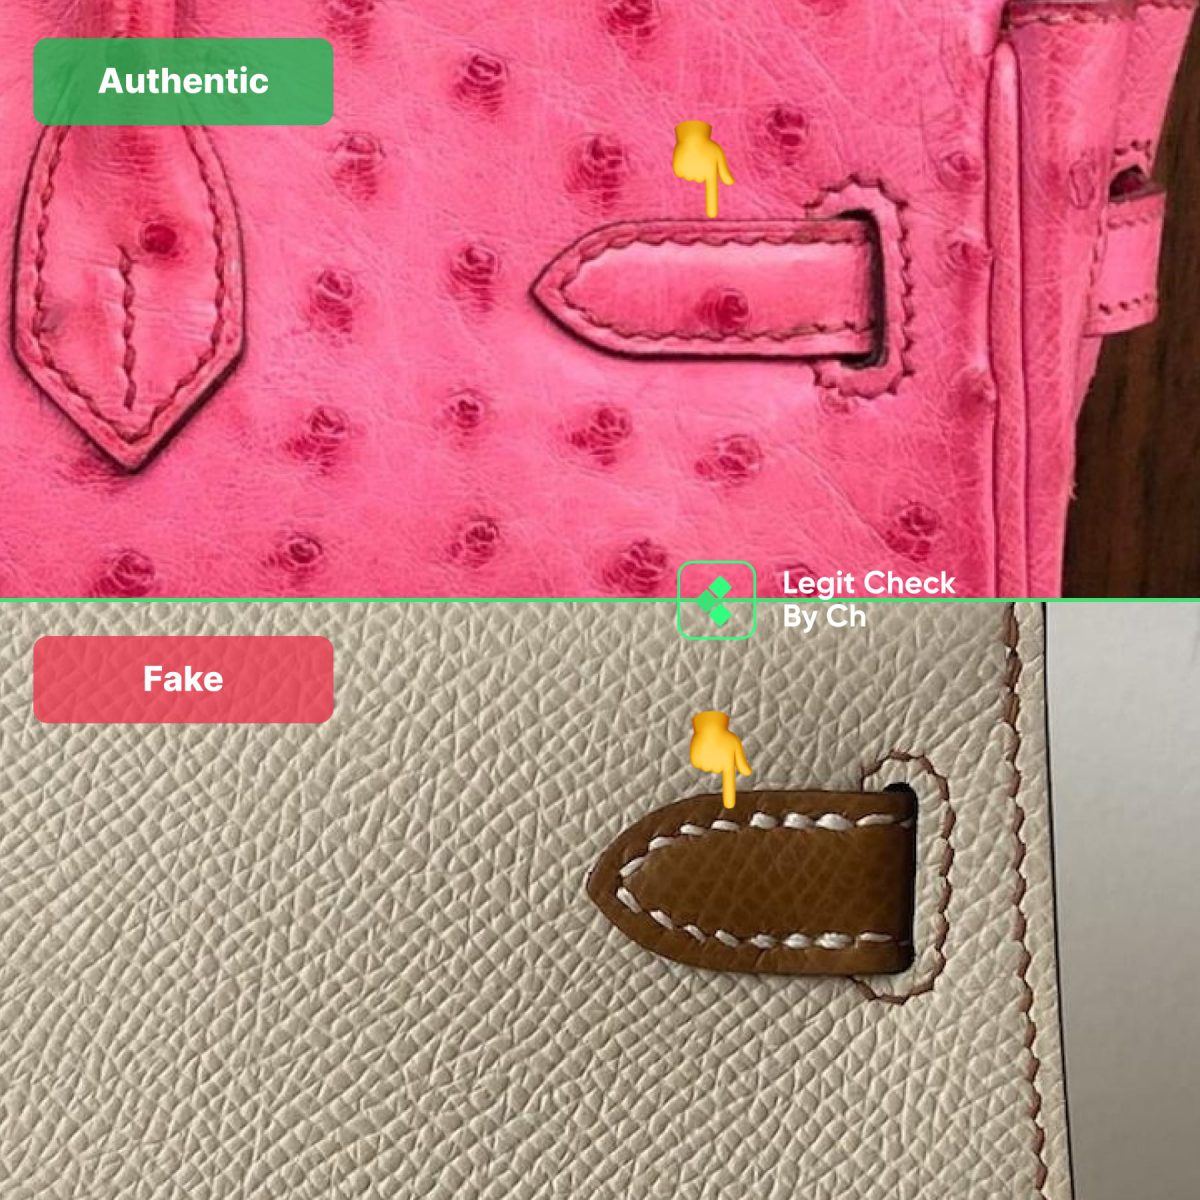 Authentic vs fake comparison of the Hermès Kelly bag's stitching